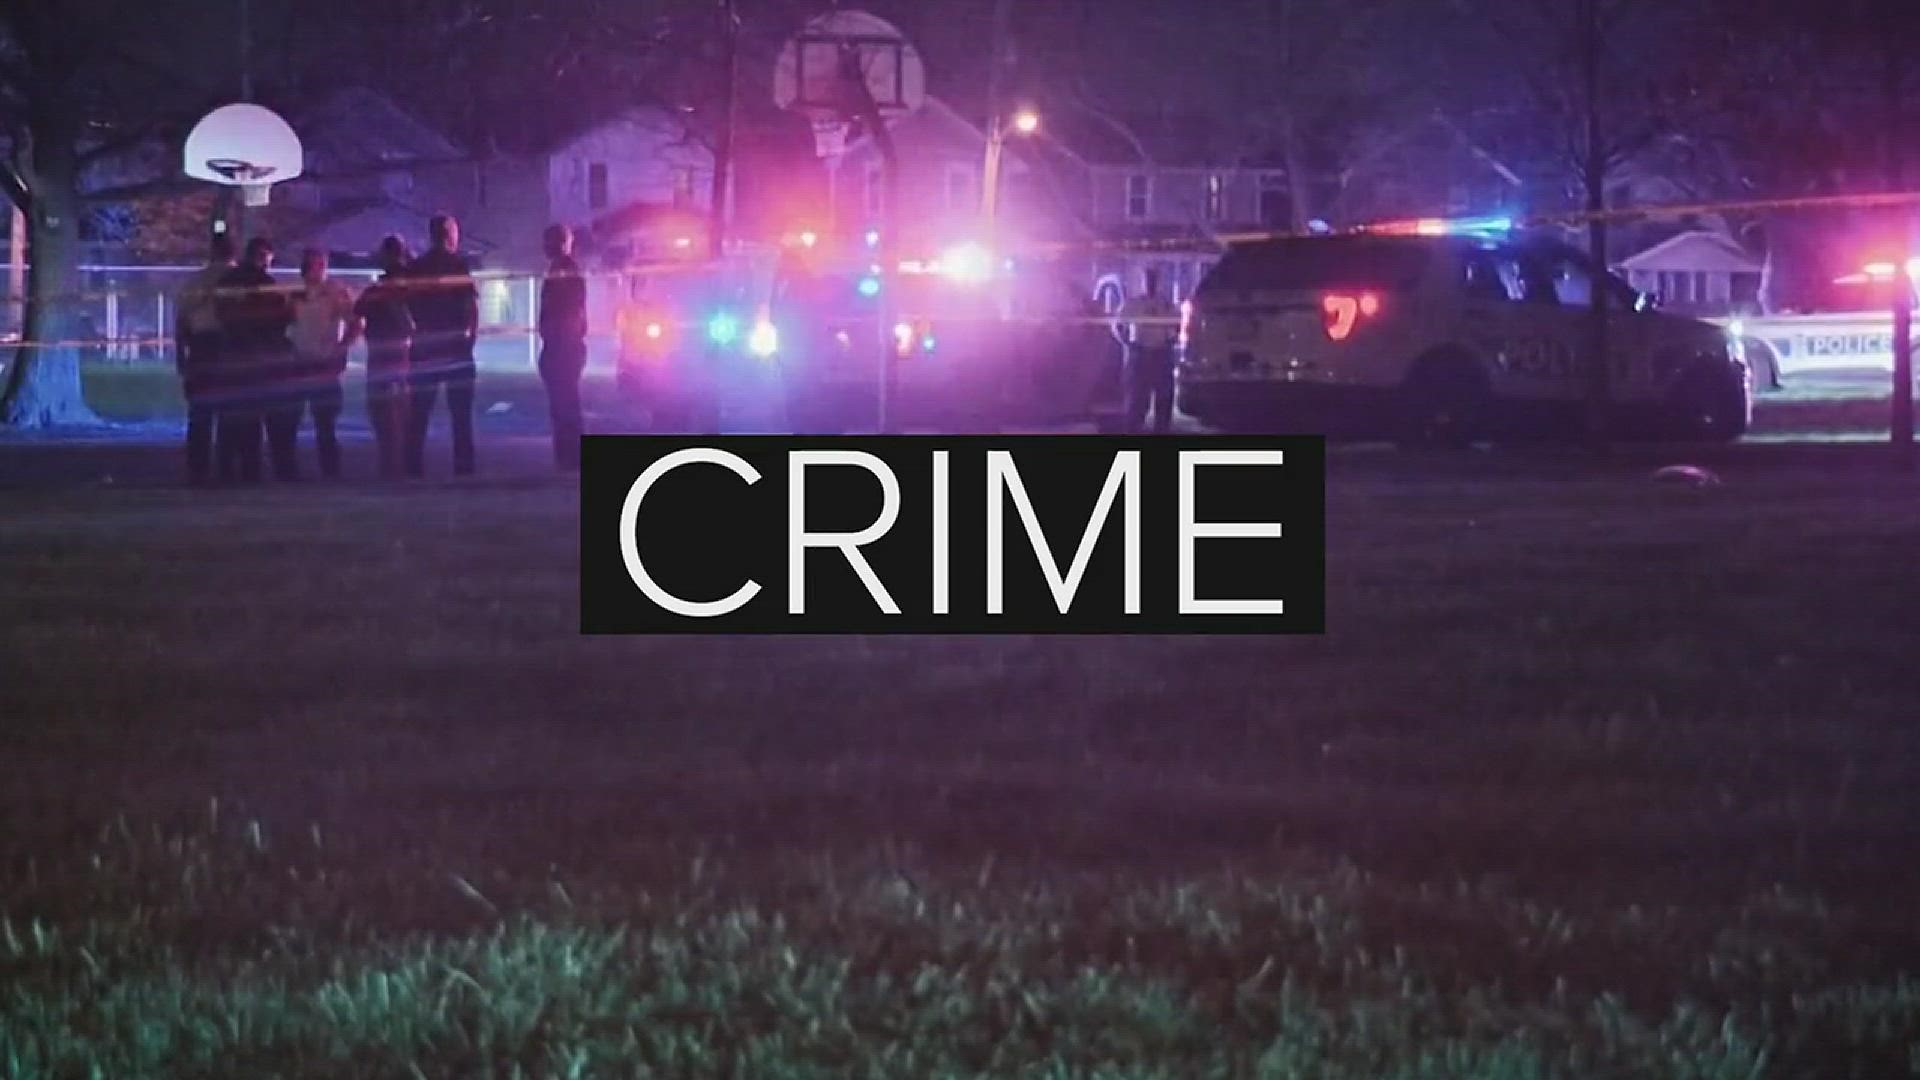 Monday at 6 p.m. on 10TV News, CrimeTracker 10 looks into the crime reports for the past three years to see whether the city's efforts to clear out crime is working.